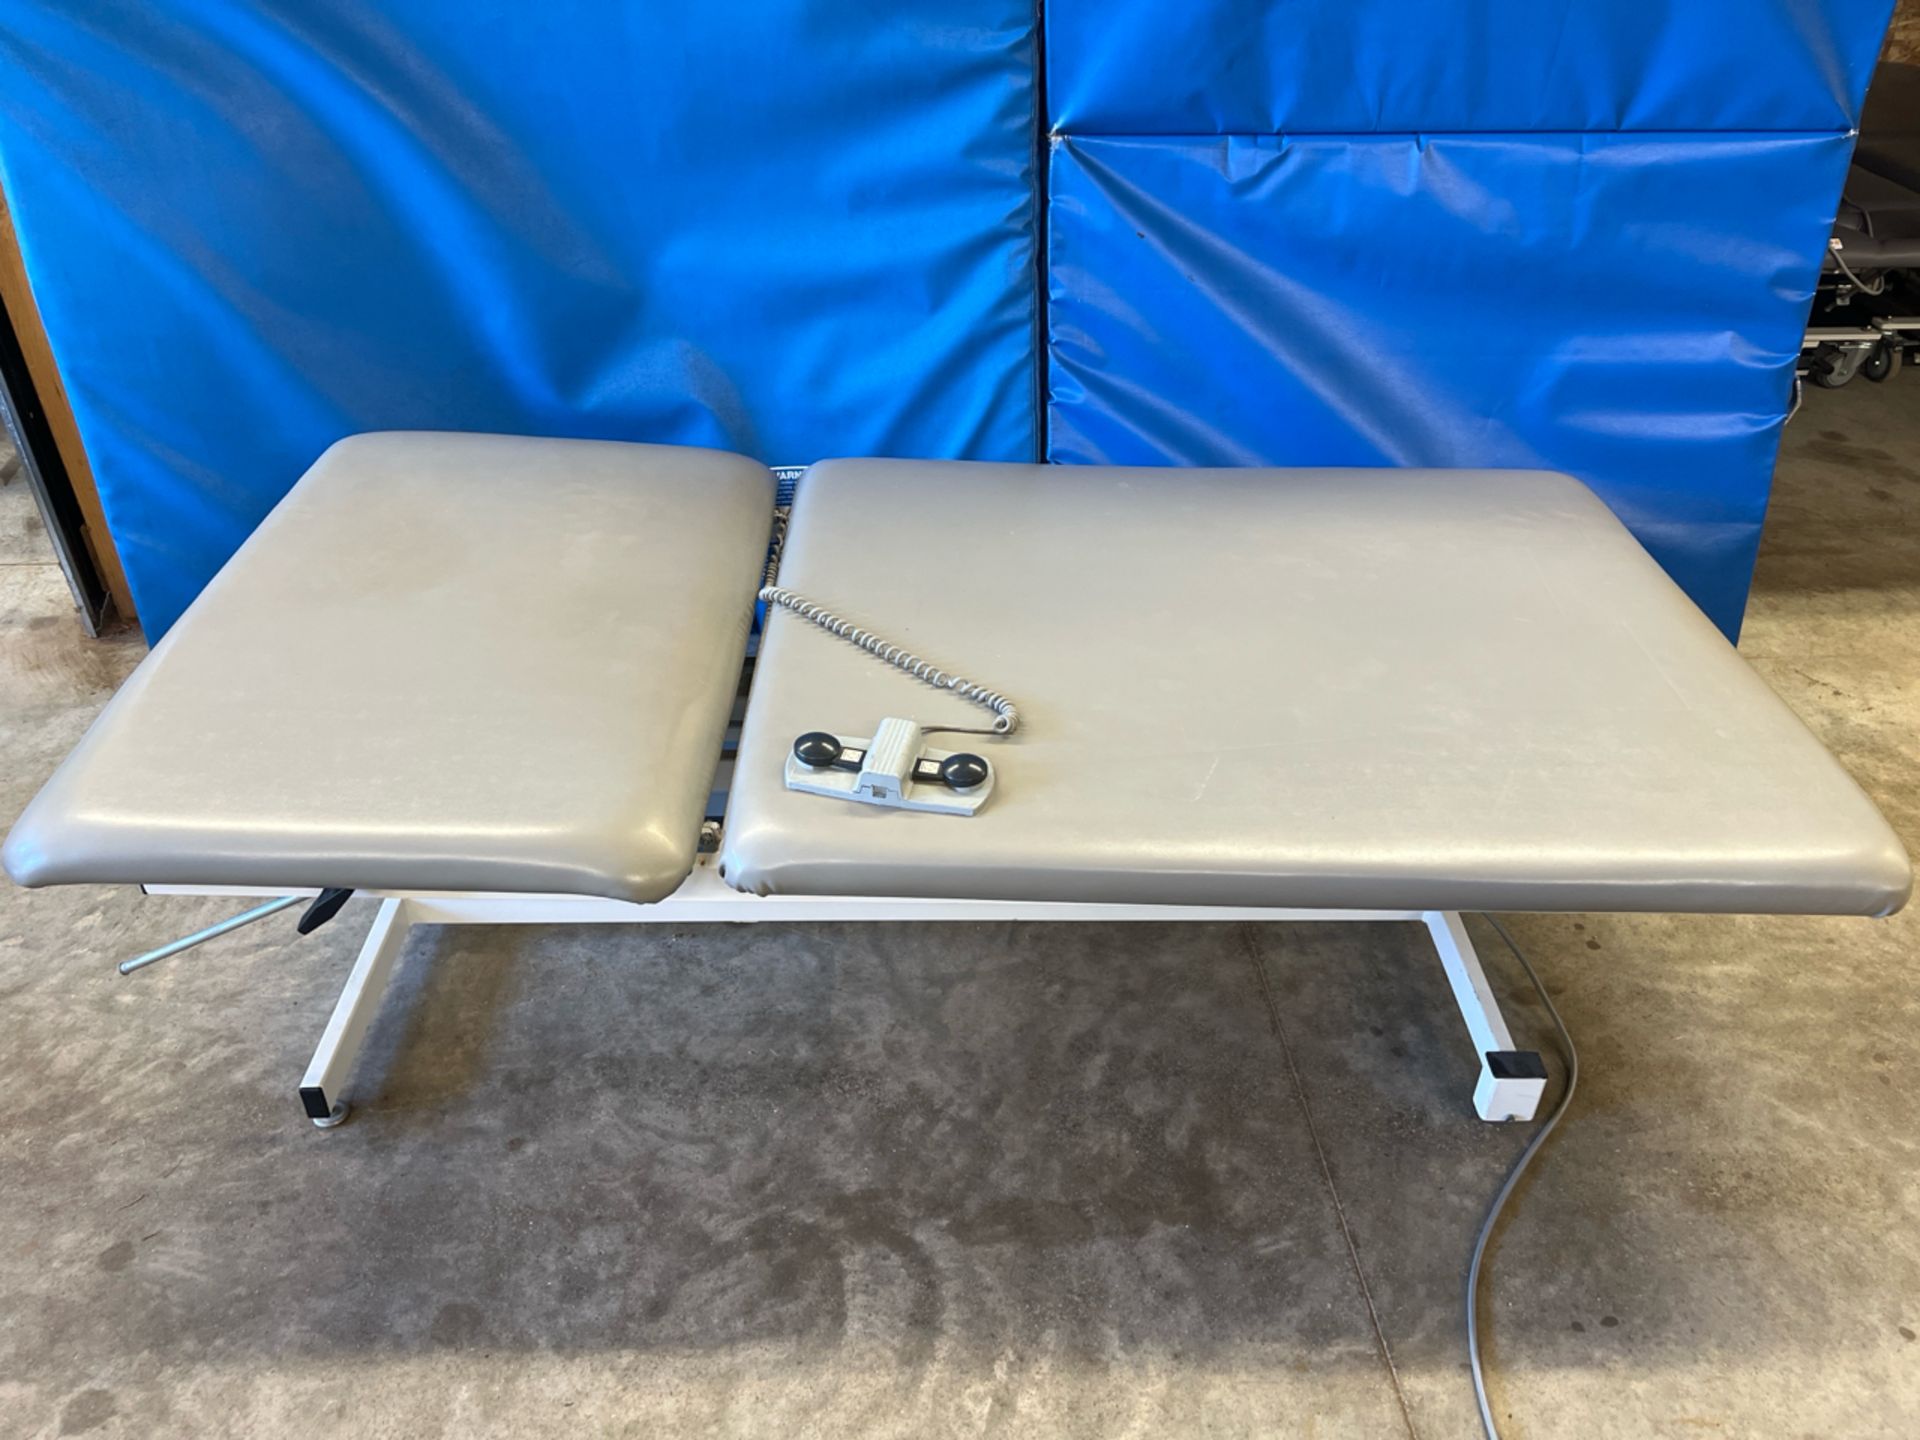 ARMEDICA AM240 POWER THERAPY TABLE WITH FOOT CONTROL